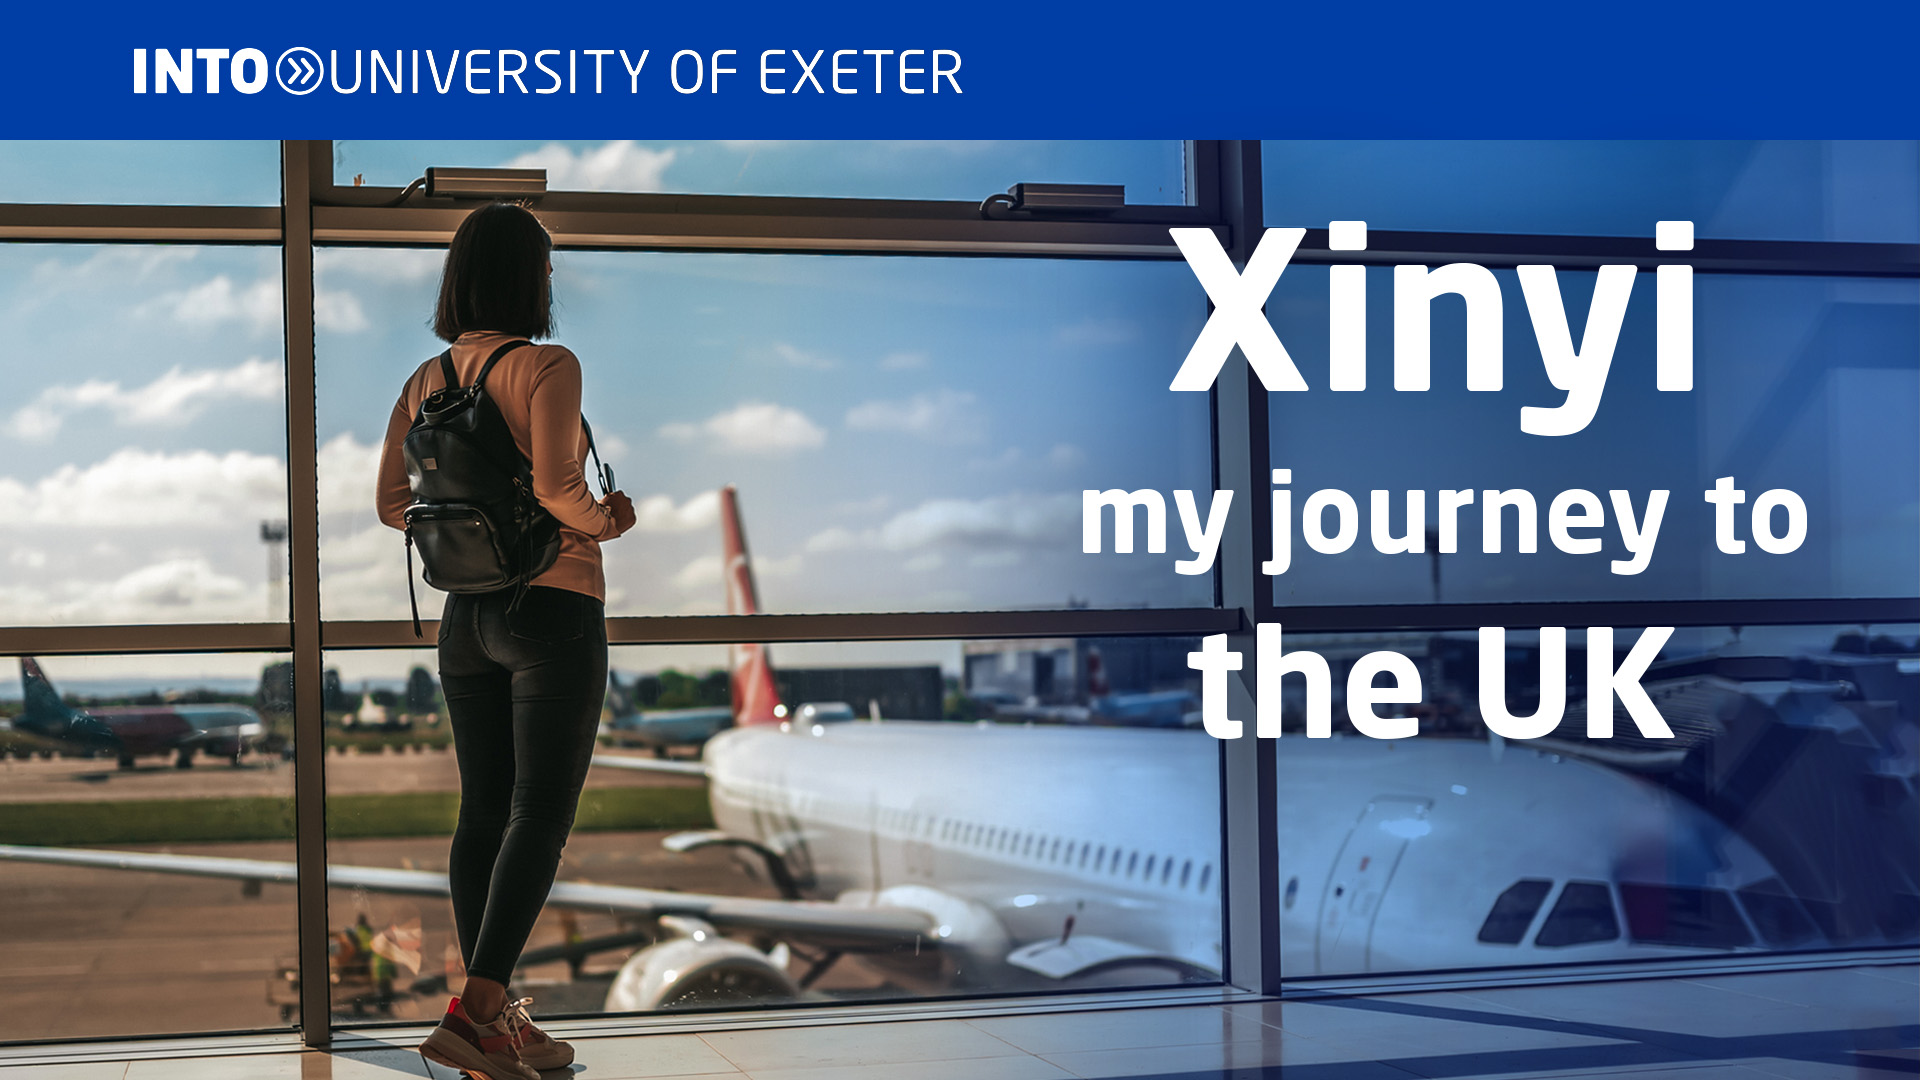 Xinyi my journey to the UK